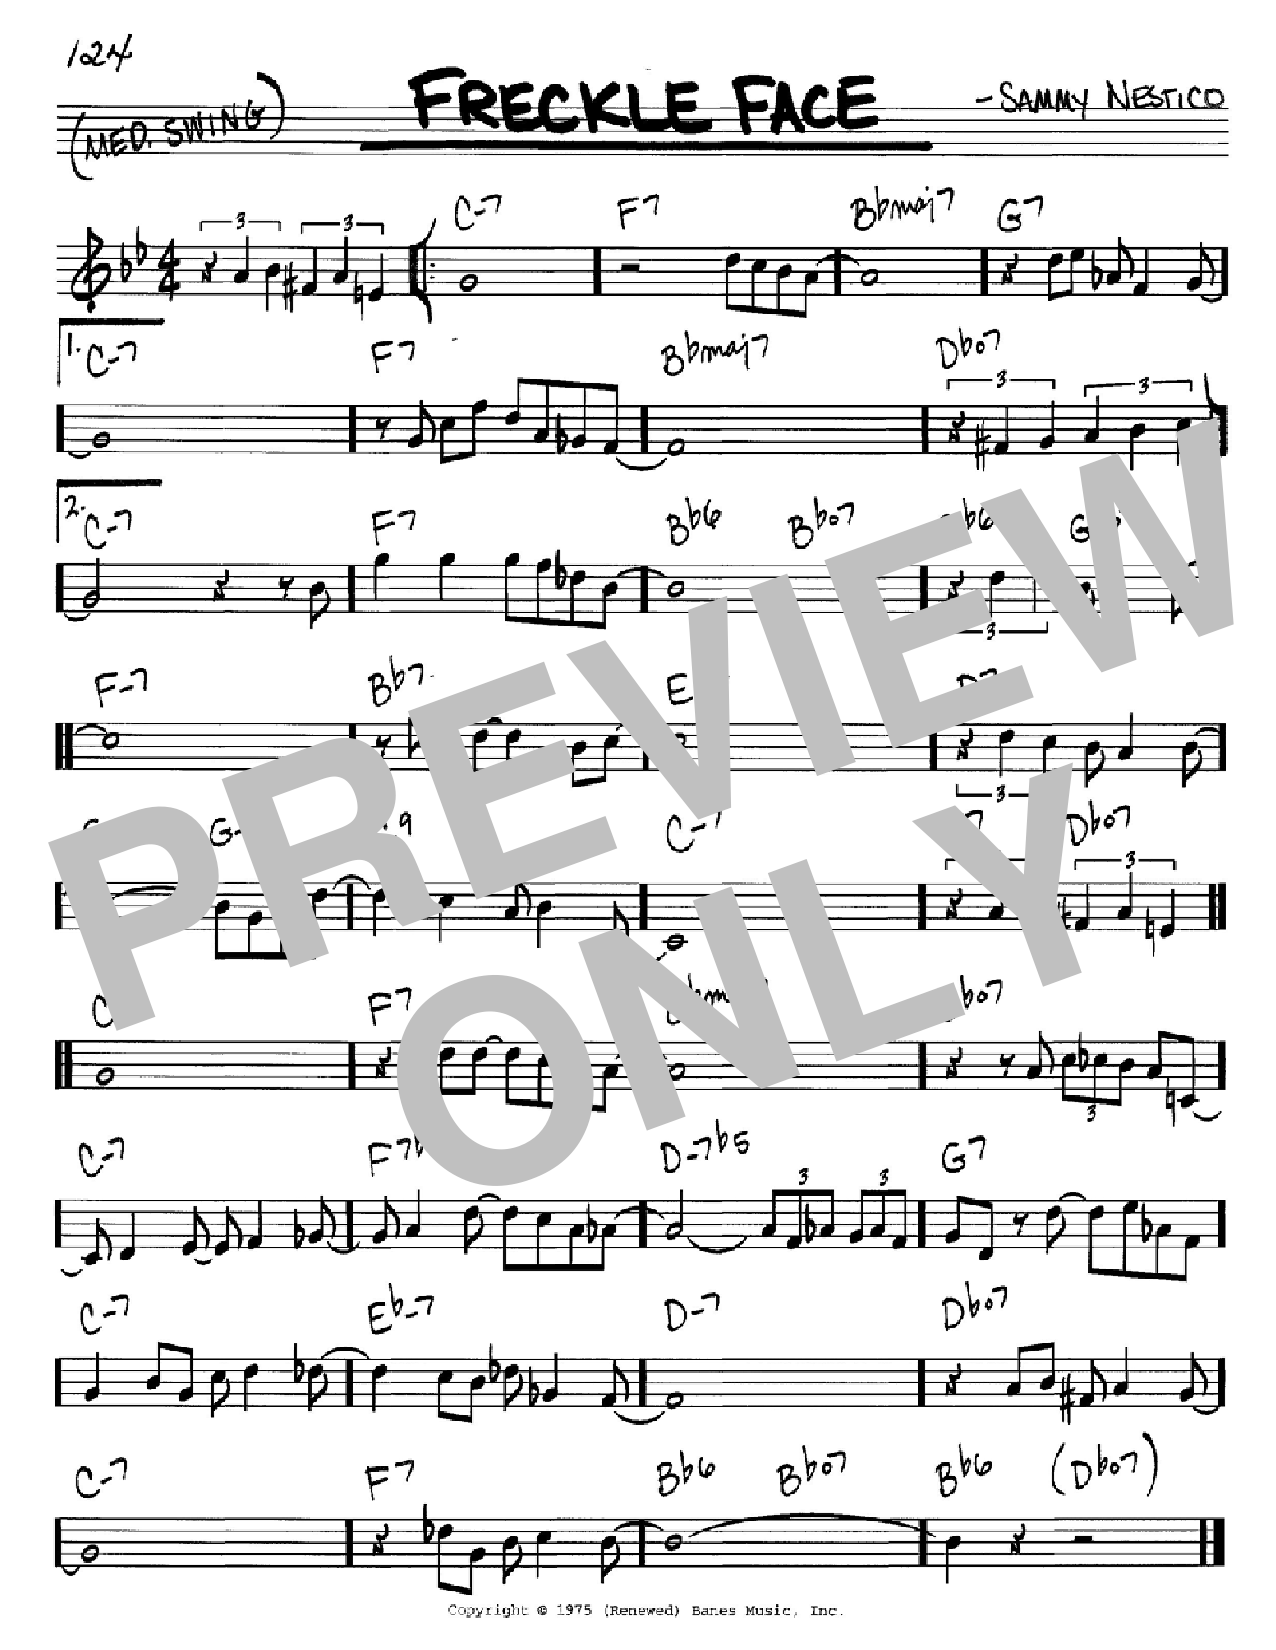 Download Count Basie Freckle Face Sheet Music